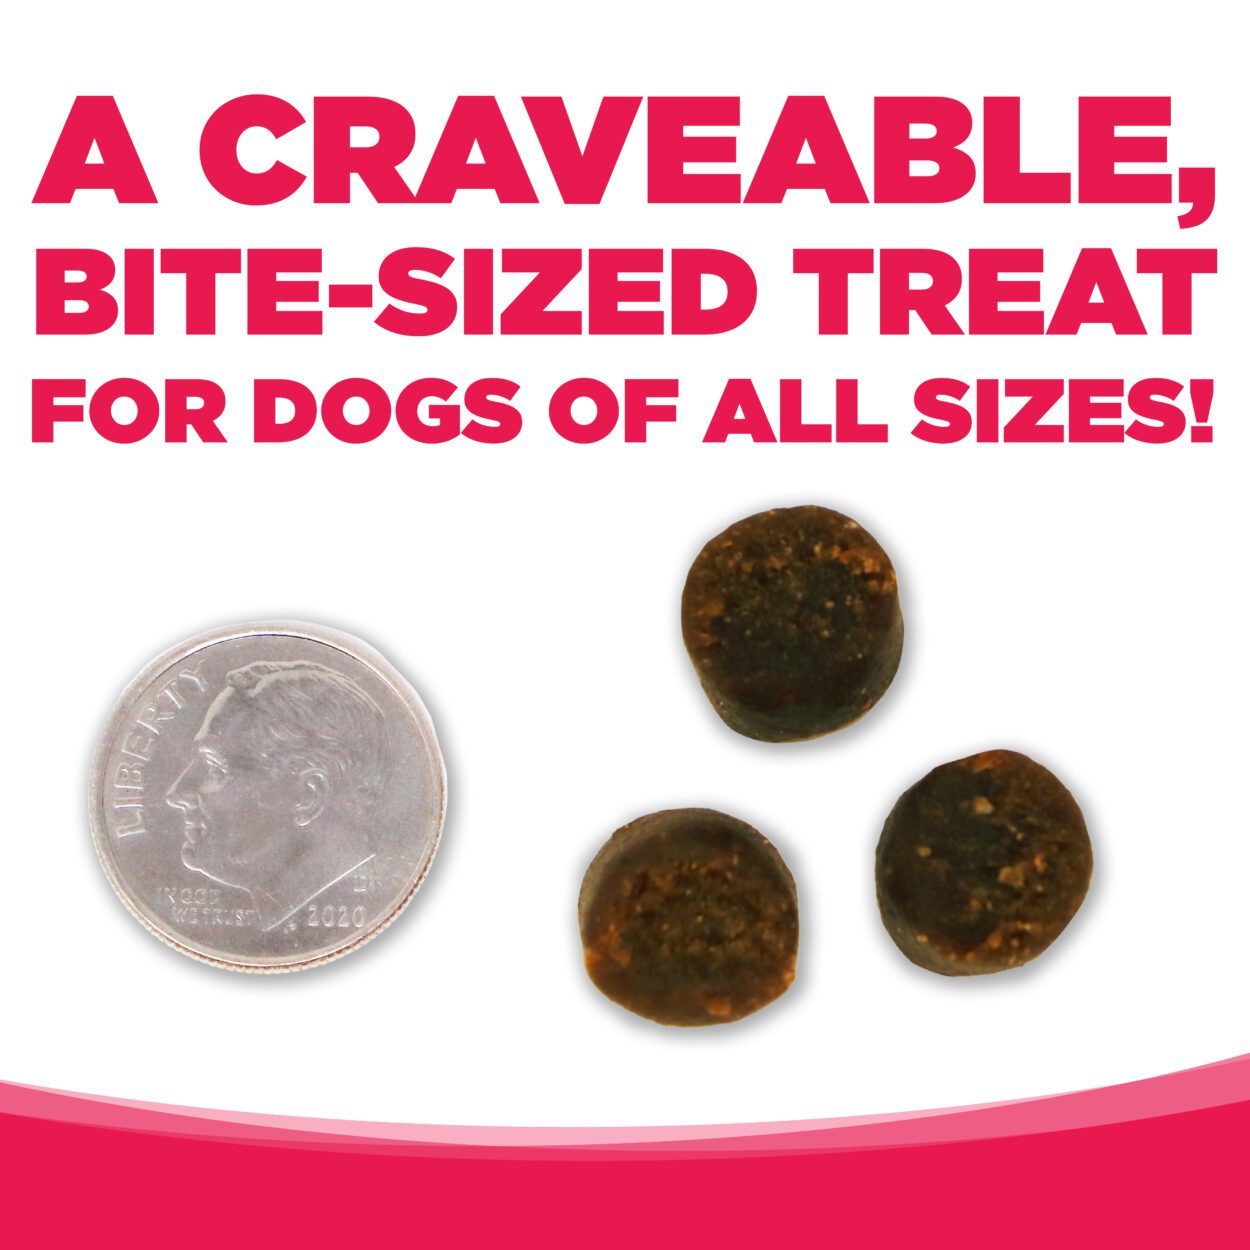 A CRAVEABLE BITE-SIZED TREAT FOR DOGS OF ALL SIZES!